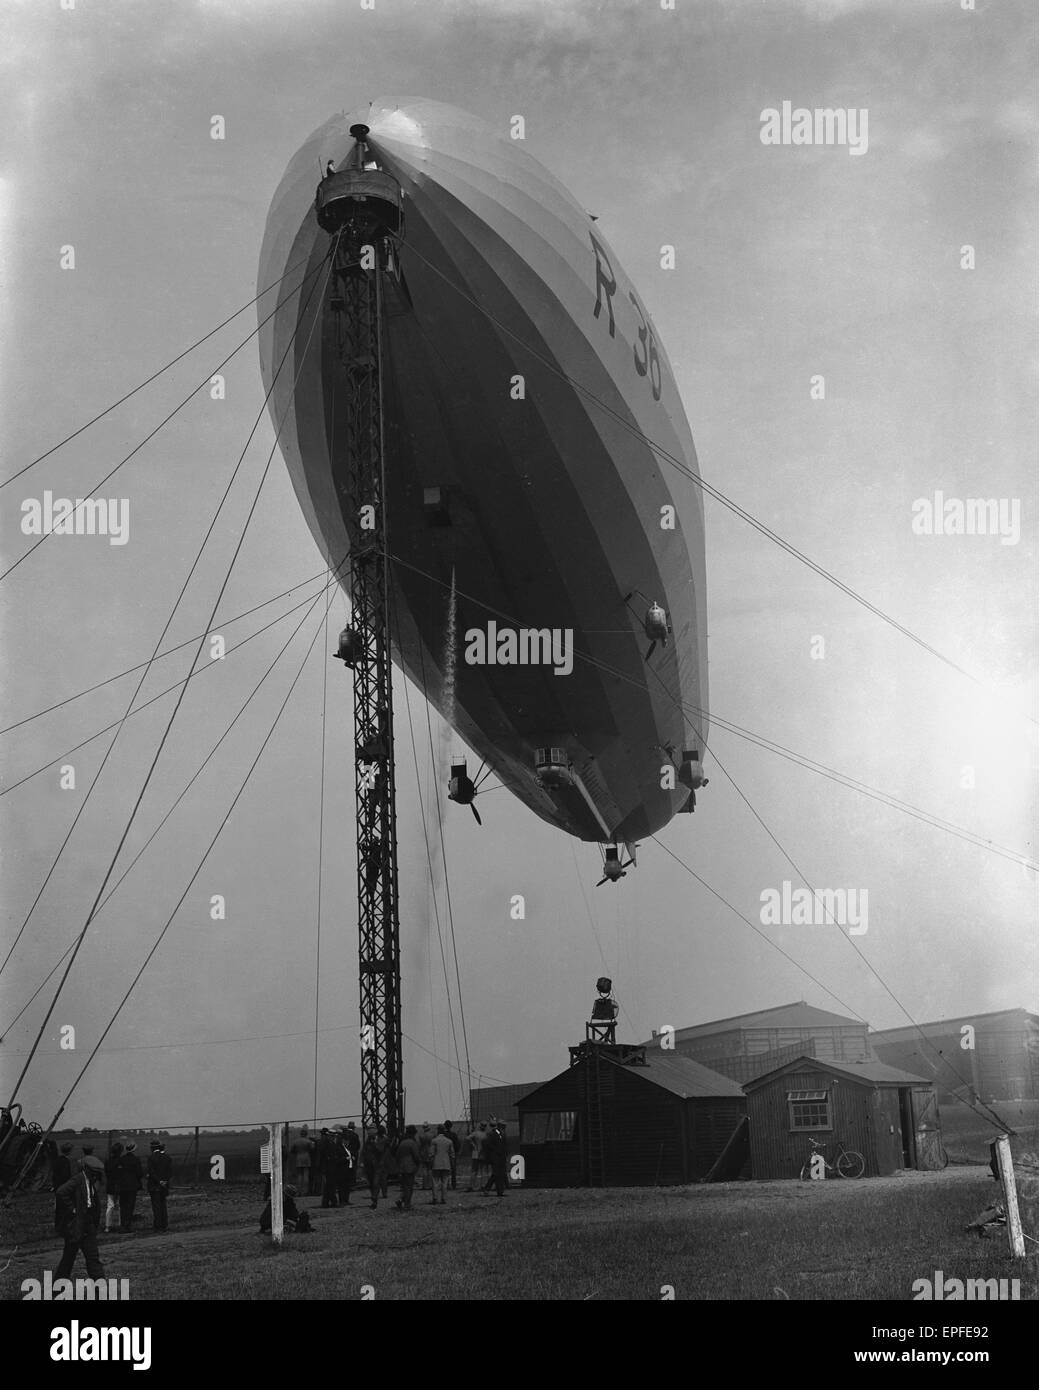 Members of Parliament visit the Airship R36 at Pulham . Passengers board the airship by climbing the stairs in the mooring mast. 19th June 1921 Stock Photo